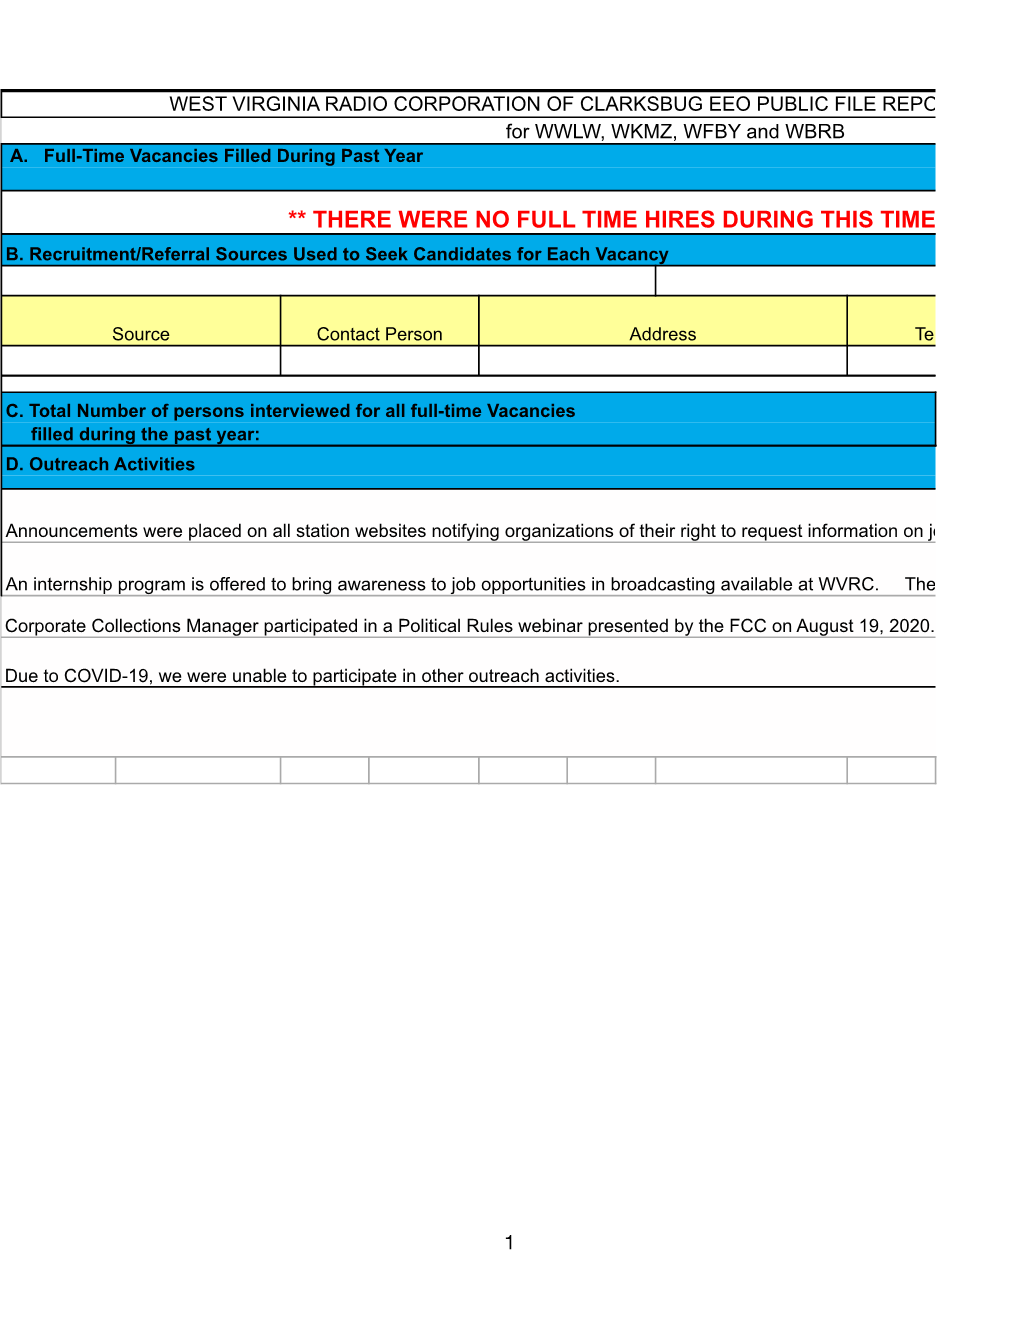 EEO PUBLIC FILE REPORT JUNE 2020 - MAY 2021 for WWLW, WKMZ, WFBY and WBRB A